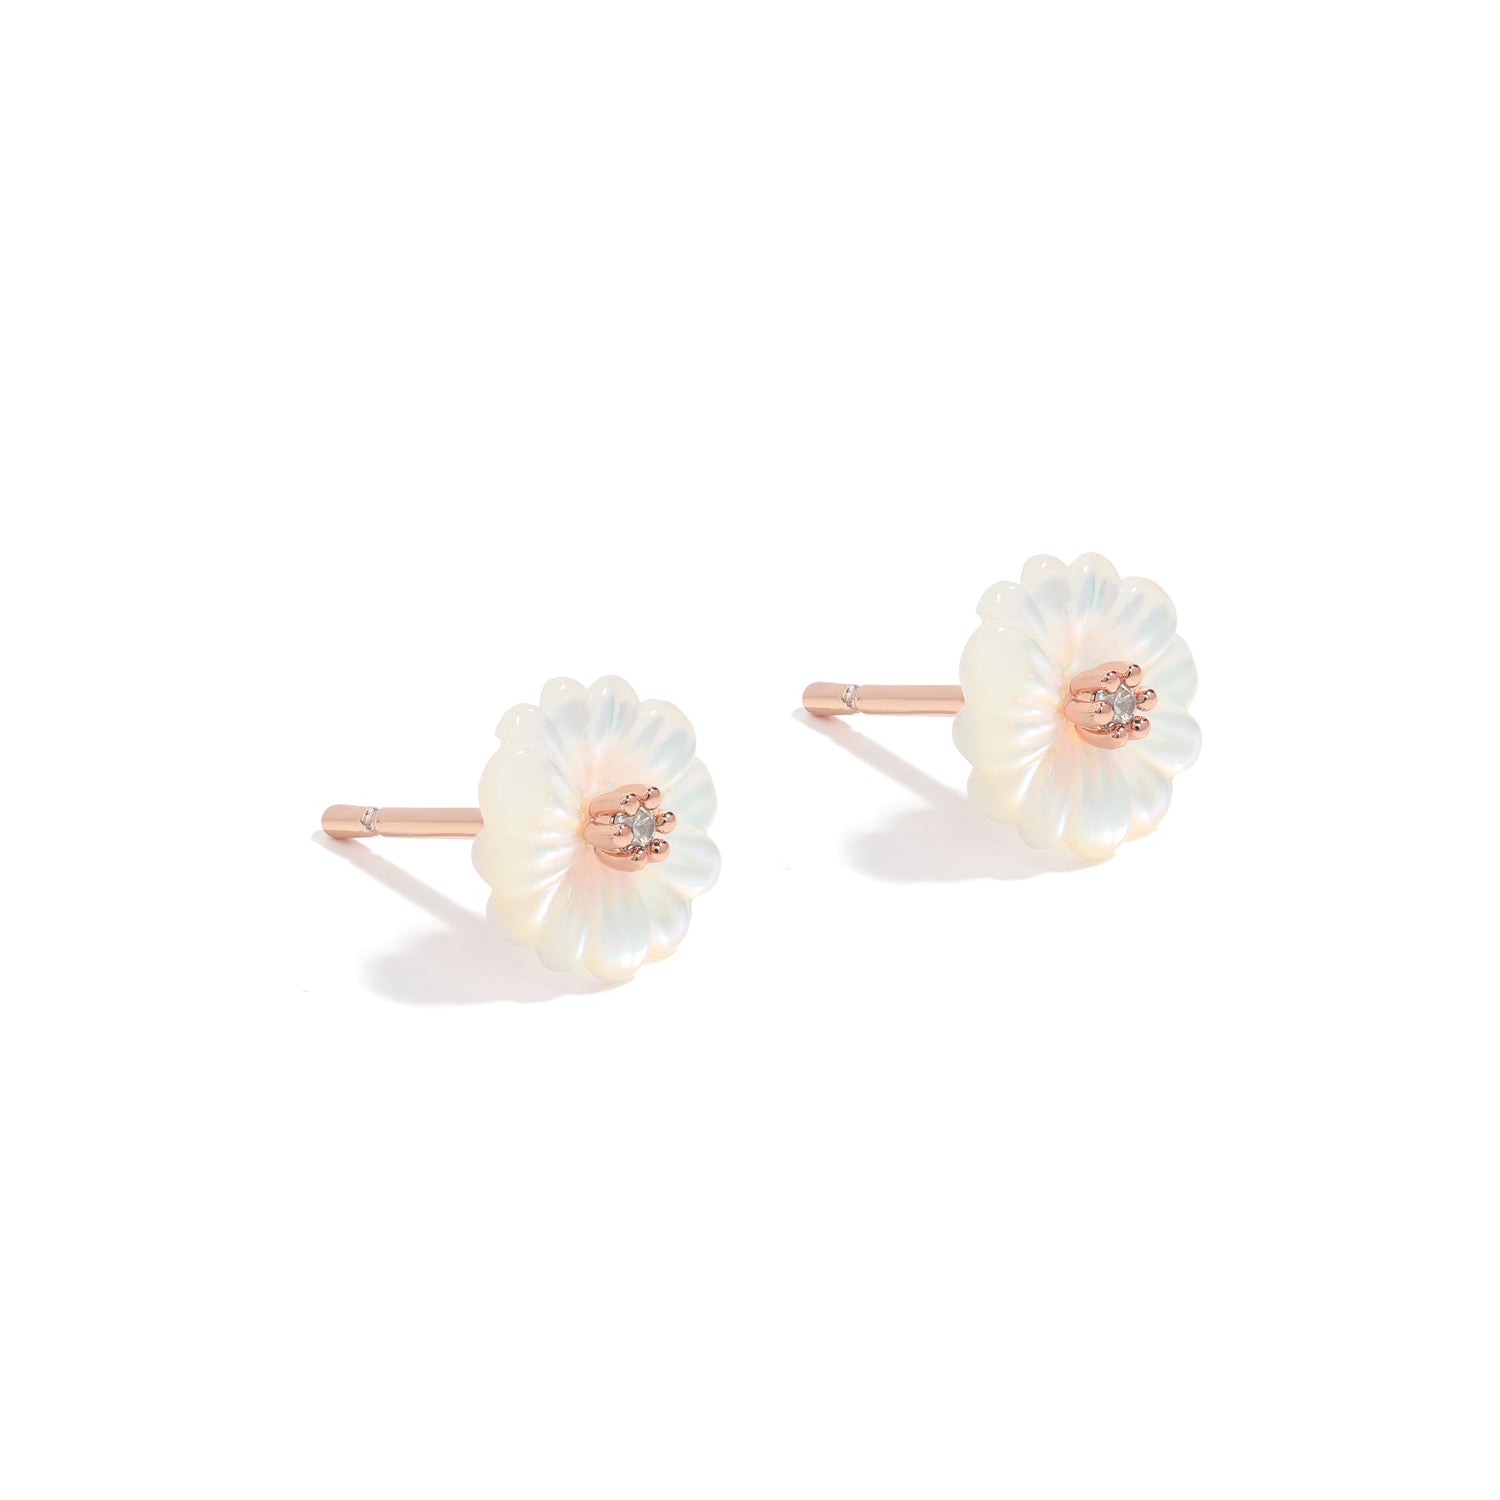 Simple and dainty studs. Rose gold earrings set with cubic zirconia stones.